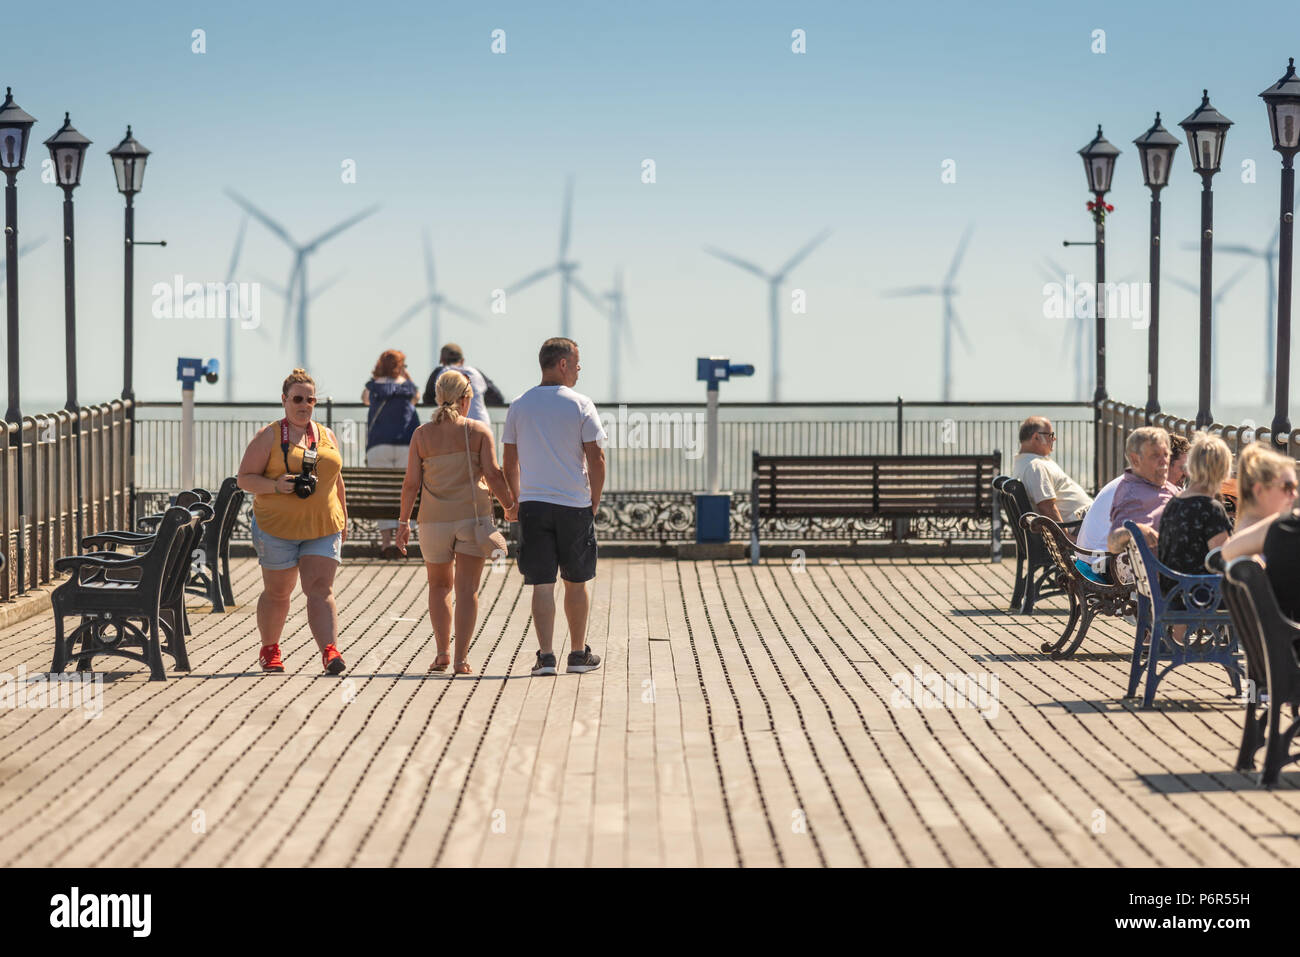 Skegness, UK. 2nd July 2018. Tourists enjoying the hot weather on Skegness Pier and viewing the offshore wind farms through the heat haze on the East Coast towards the usually cold North Sea. Credit: Steven Booth/Alamy Live News. Stock Photo